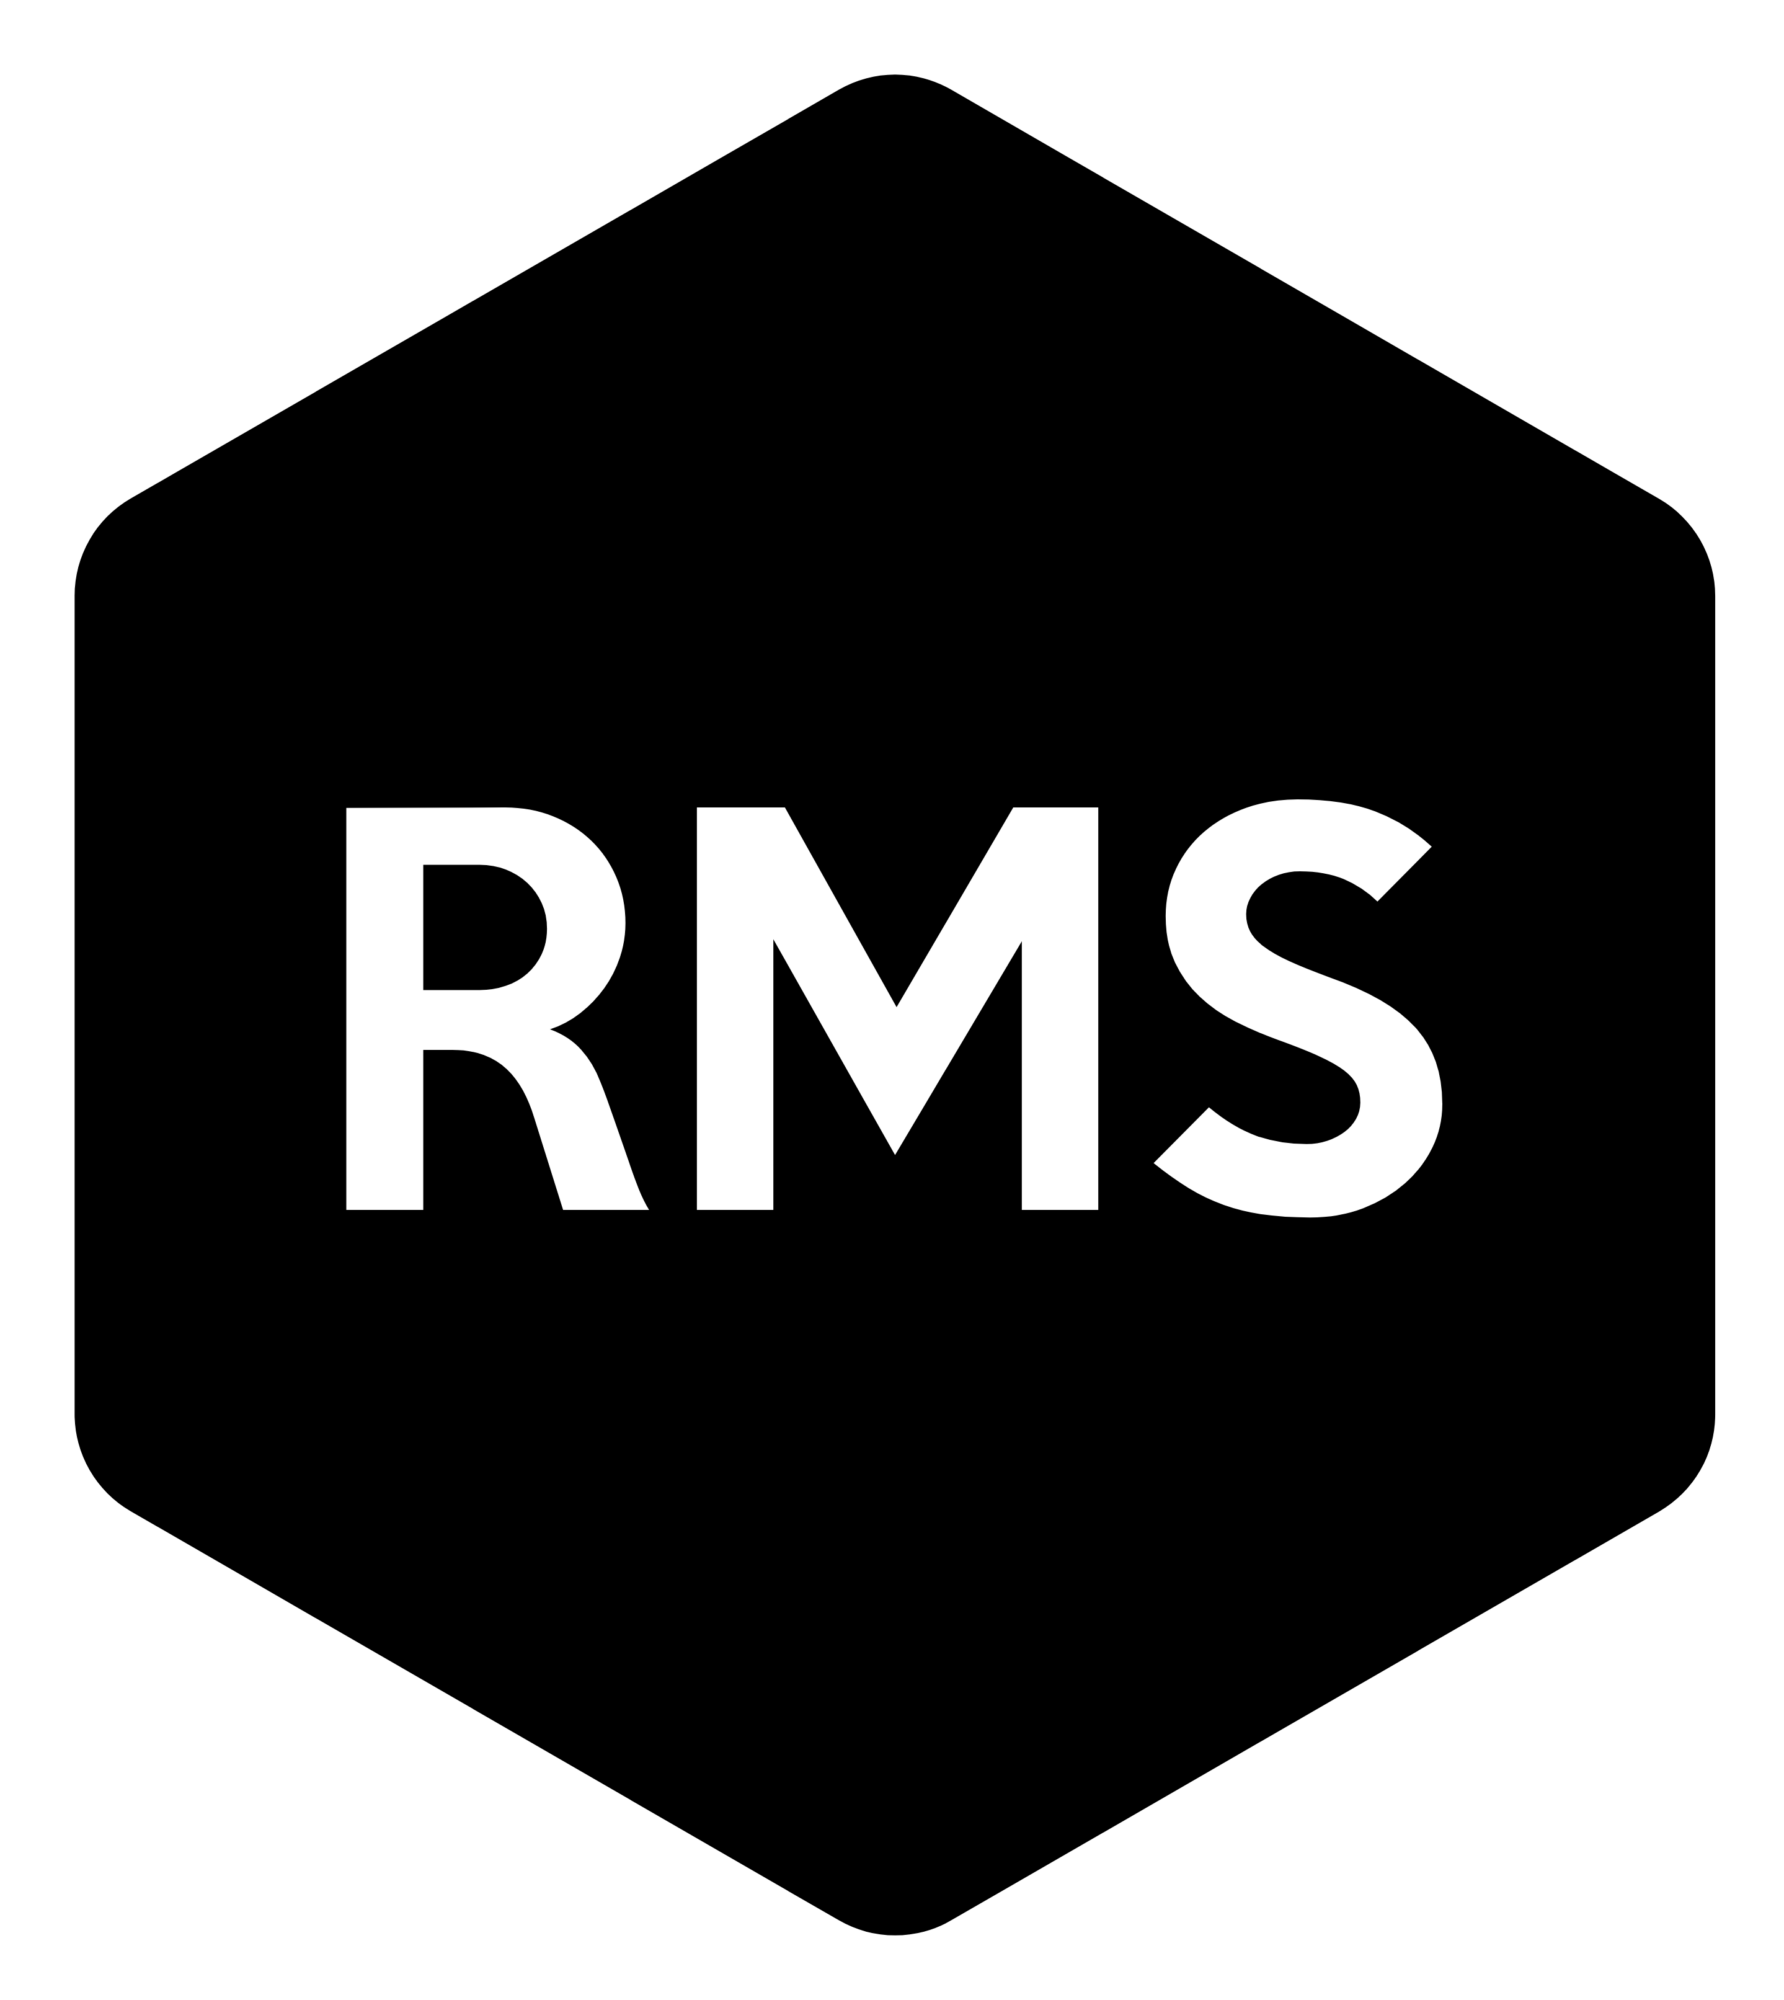 RMS - Reverse Mortgage Solutions, Inc Trademark Registration